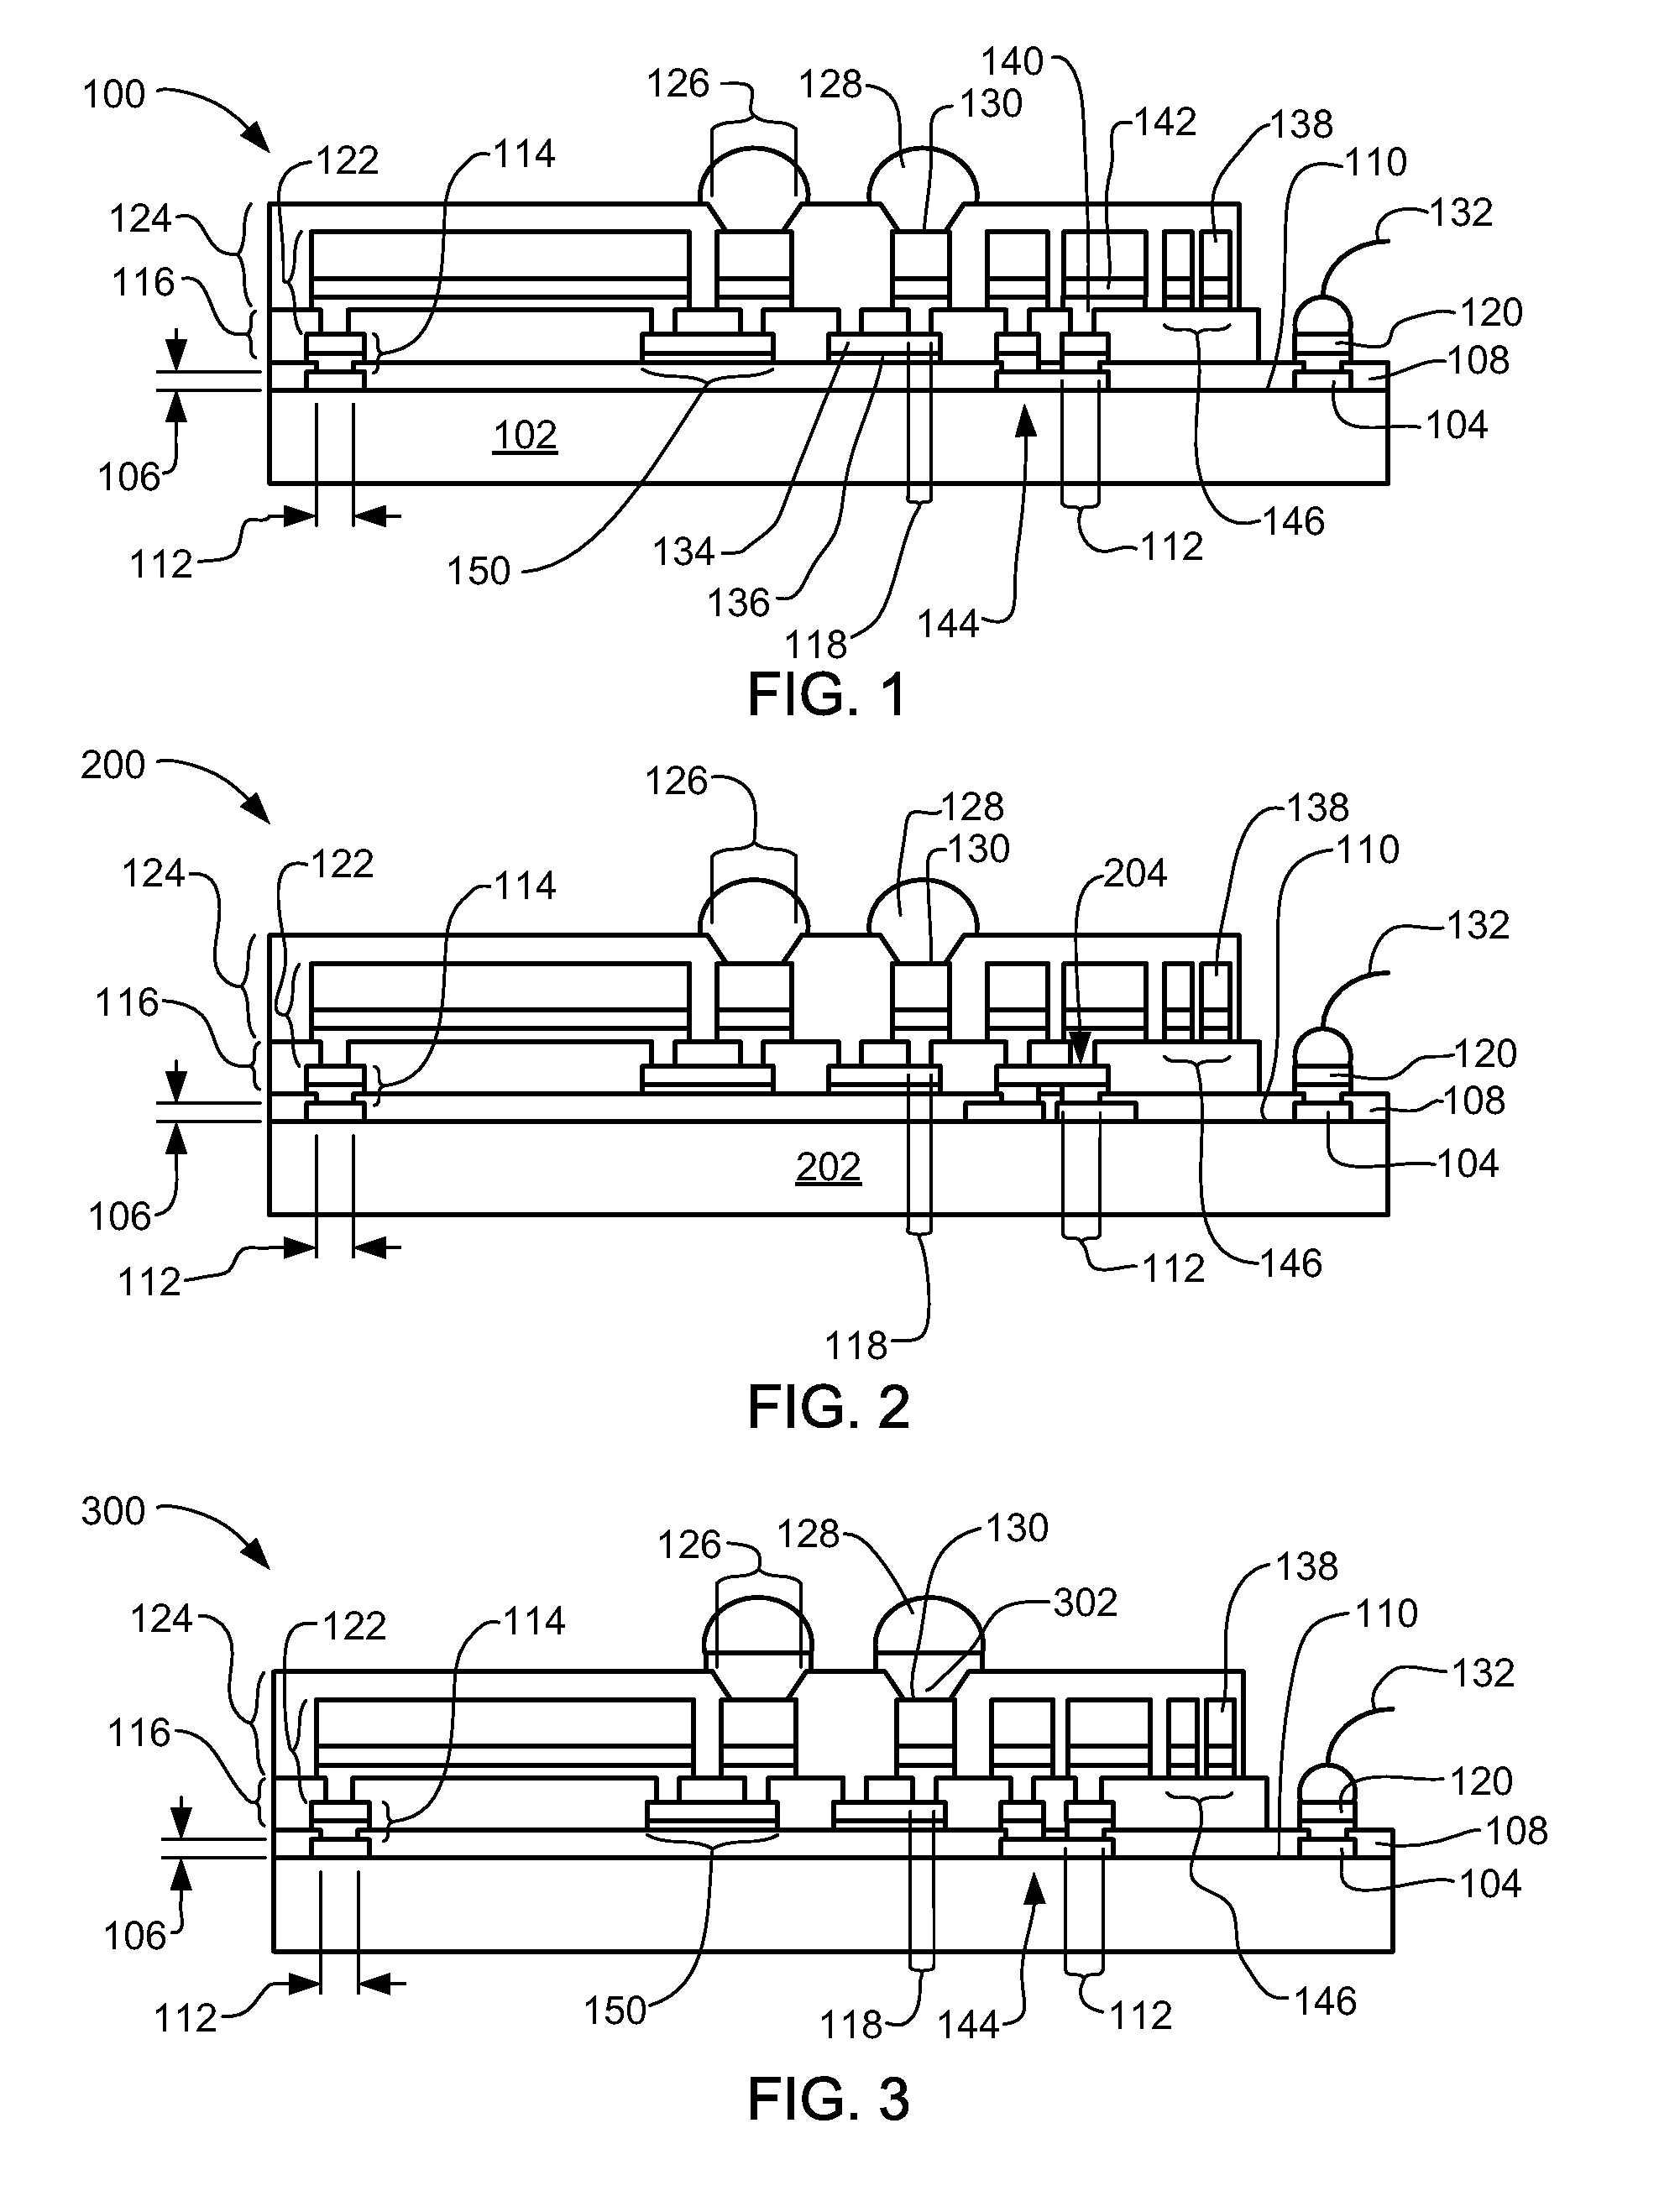 Integrated circuit package system with post-passivation interconnection and integration